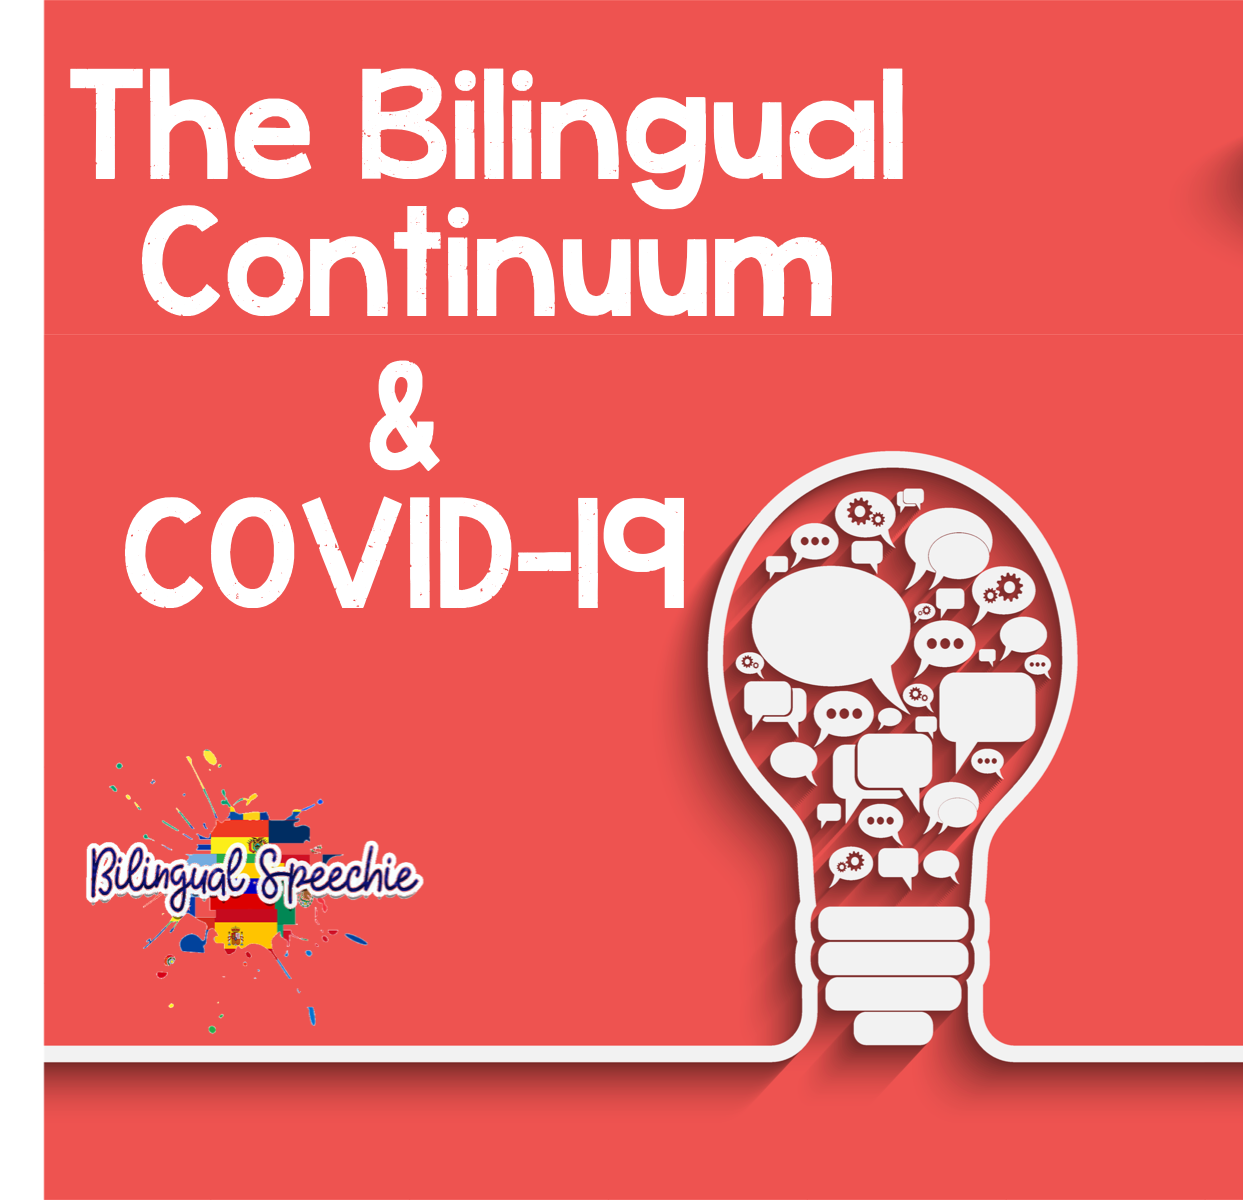 The Bilingual Continuum During Times of COVID-19